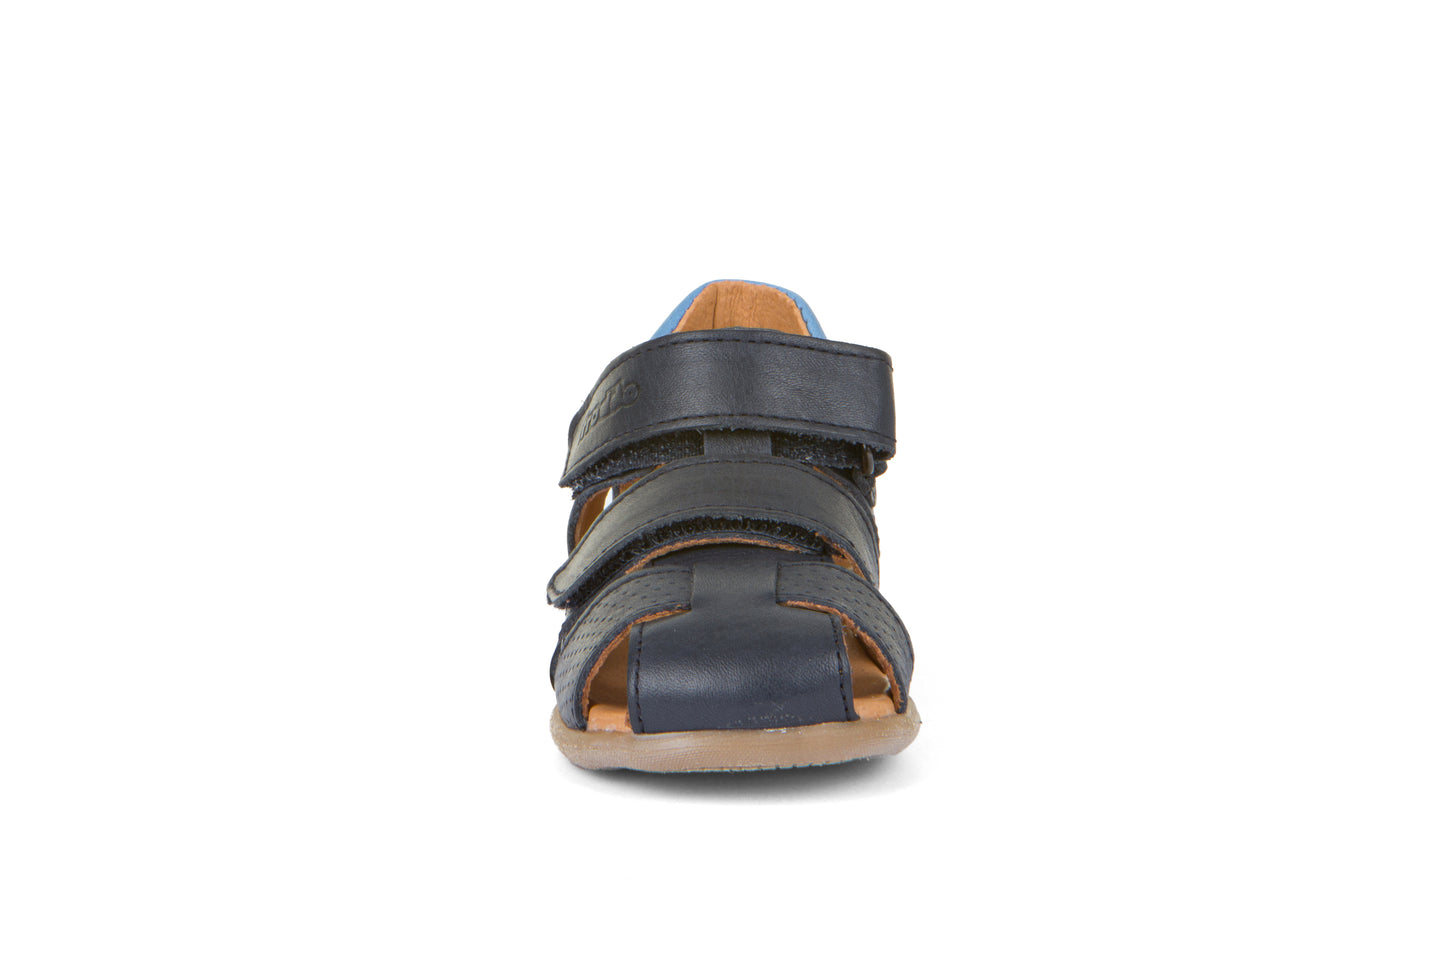 A boys closed toe sandal by Froddo, style G2150169 Carte Double, in navy with light blue collar, velcro fastening. Front view.